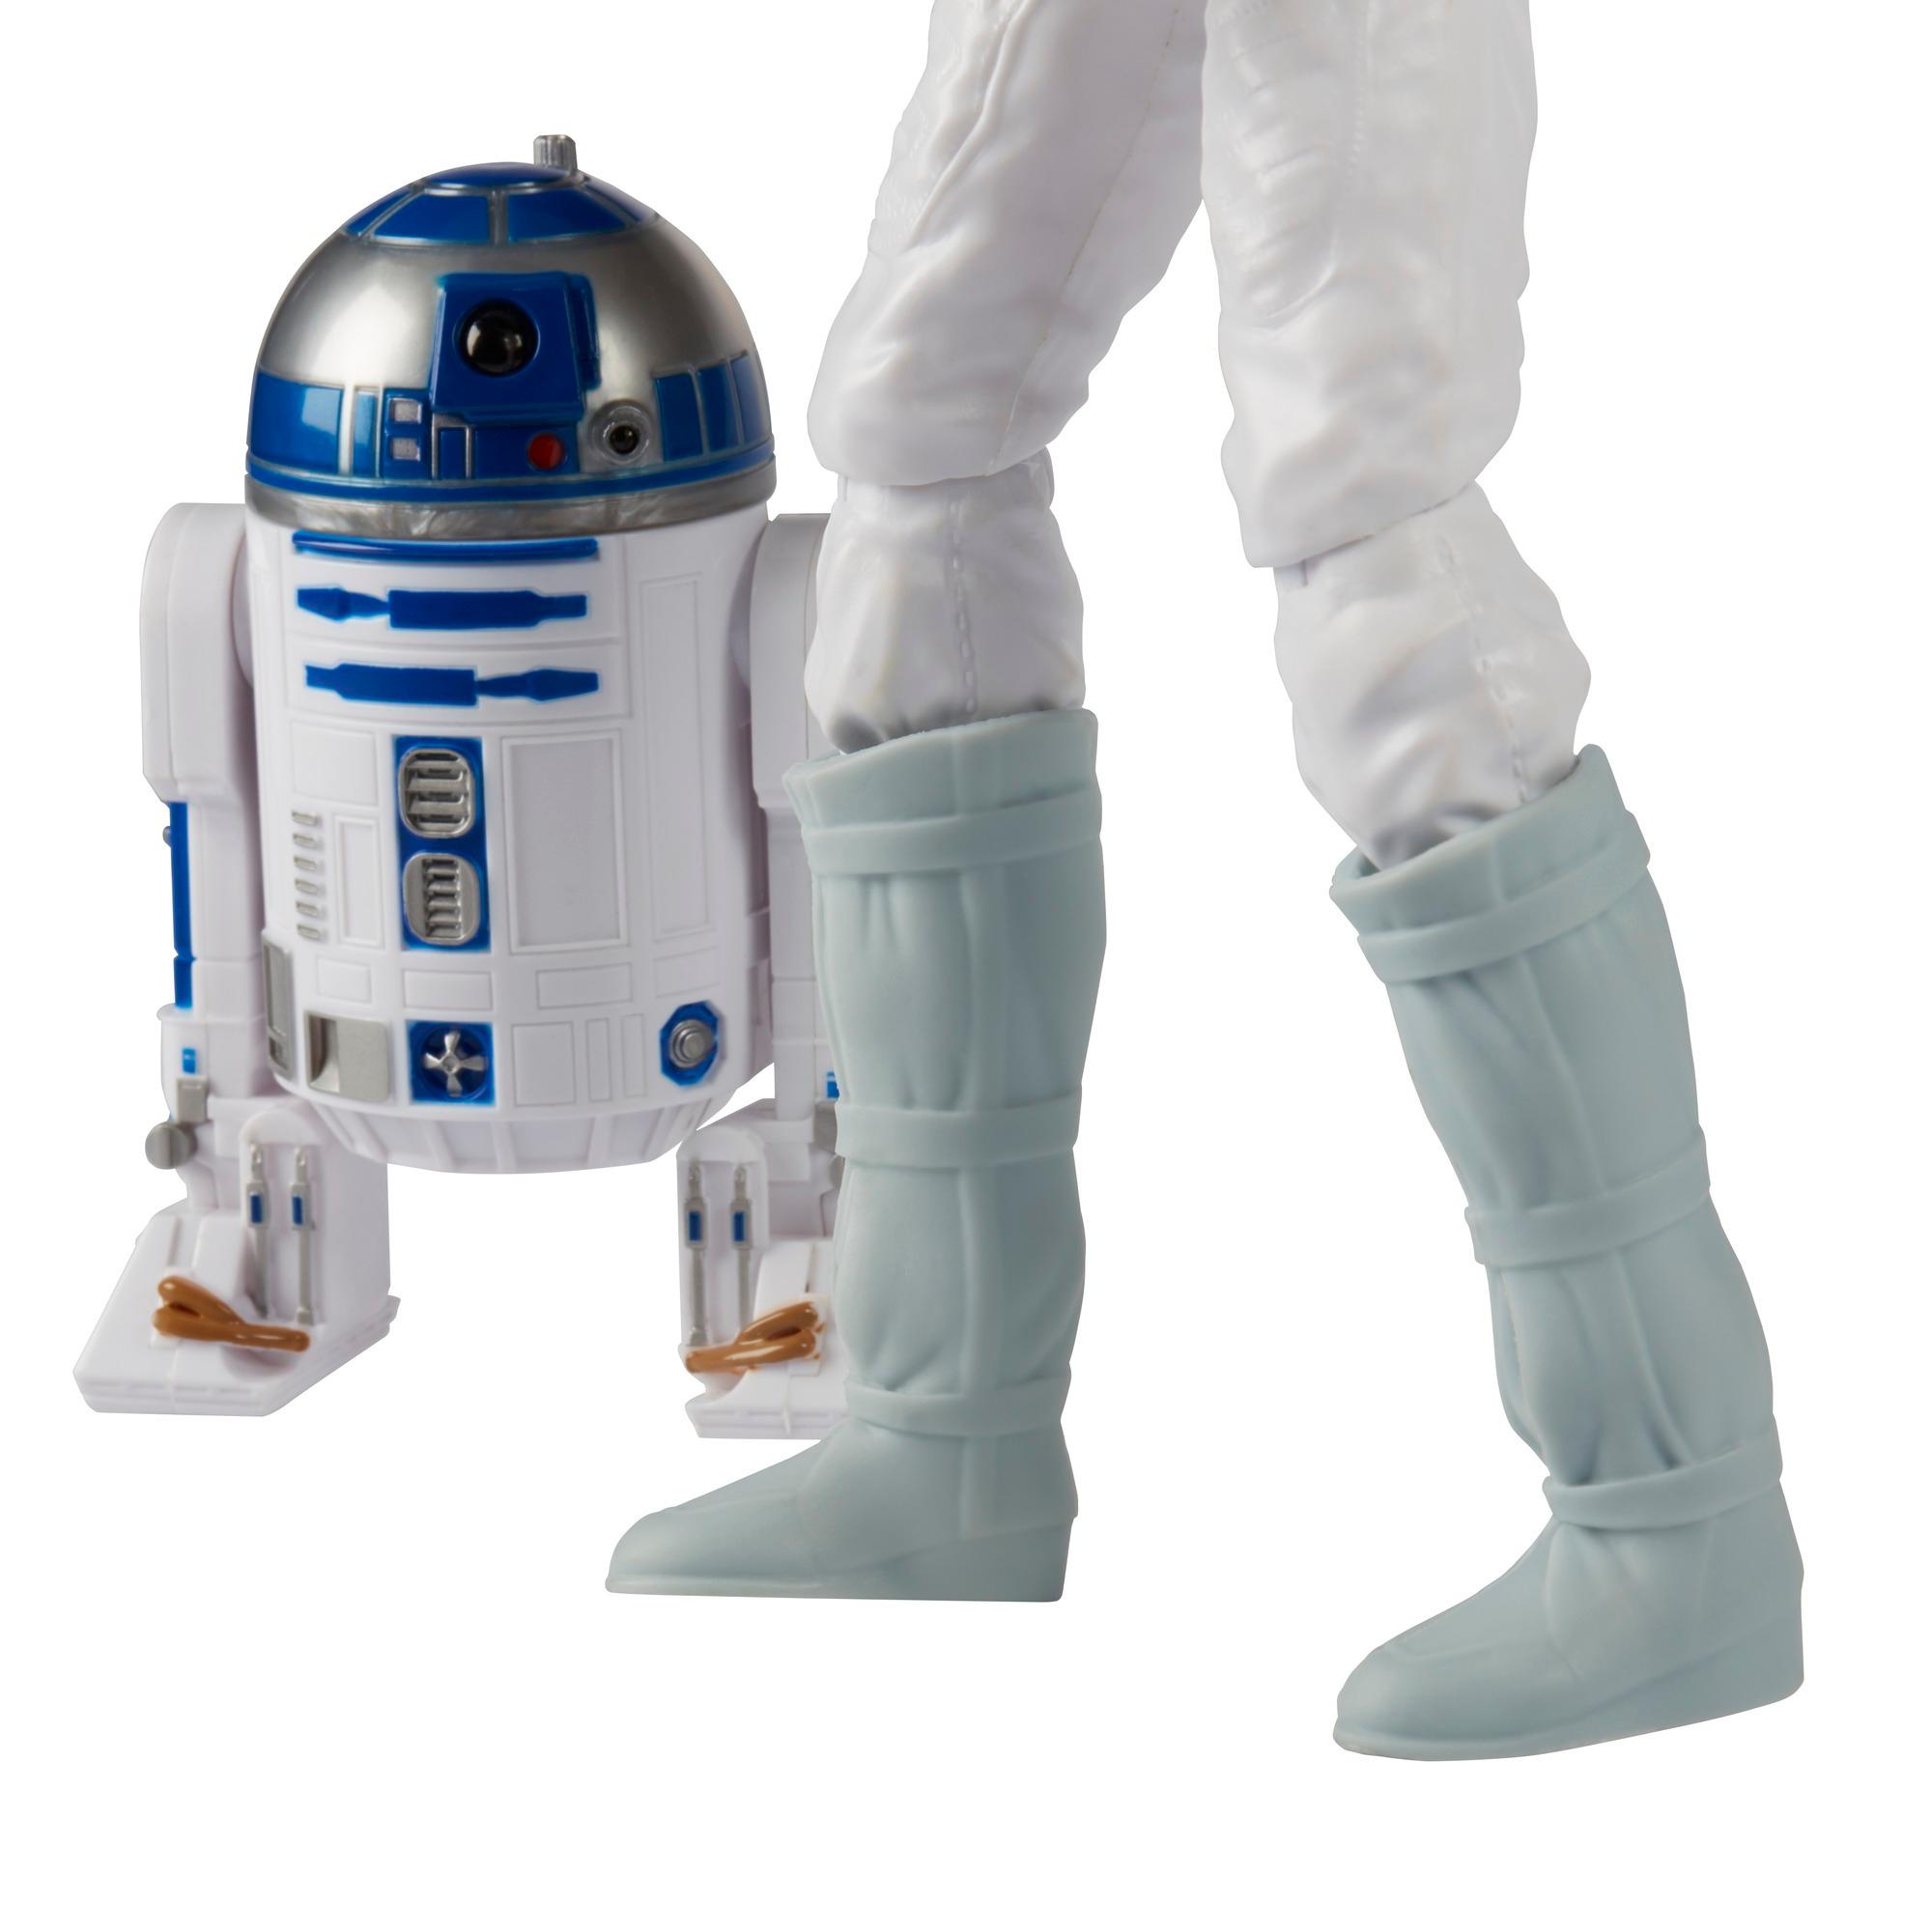 Hasbro Star Wars Forces Of Destiny Princess Leia Organa And R2-D2 Adventure Set Action Figure for sale online 